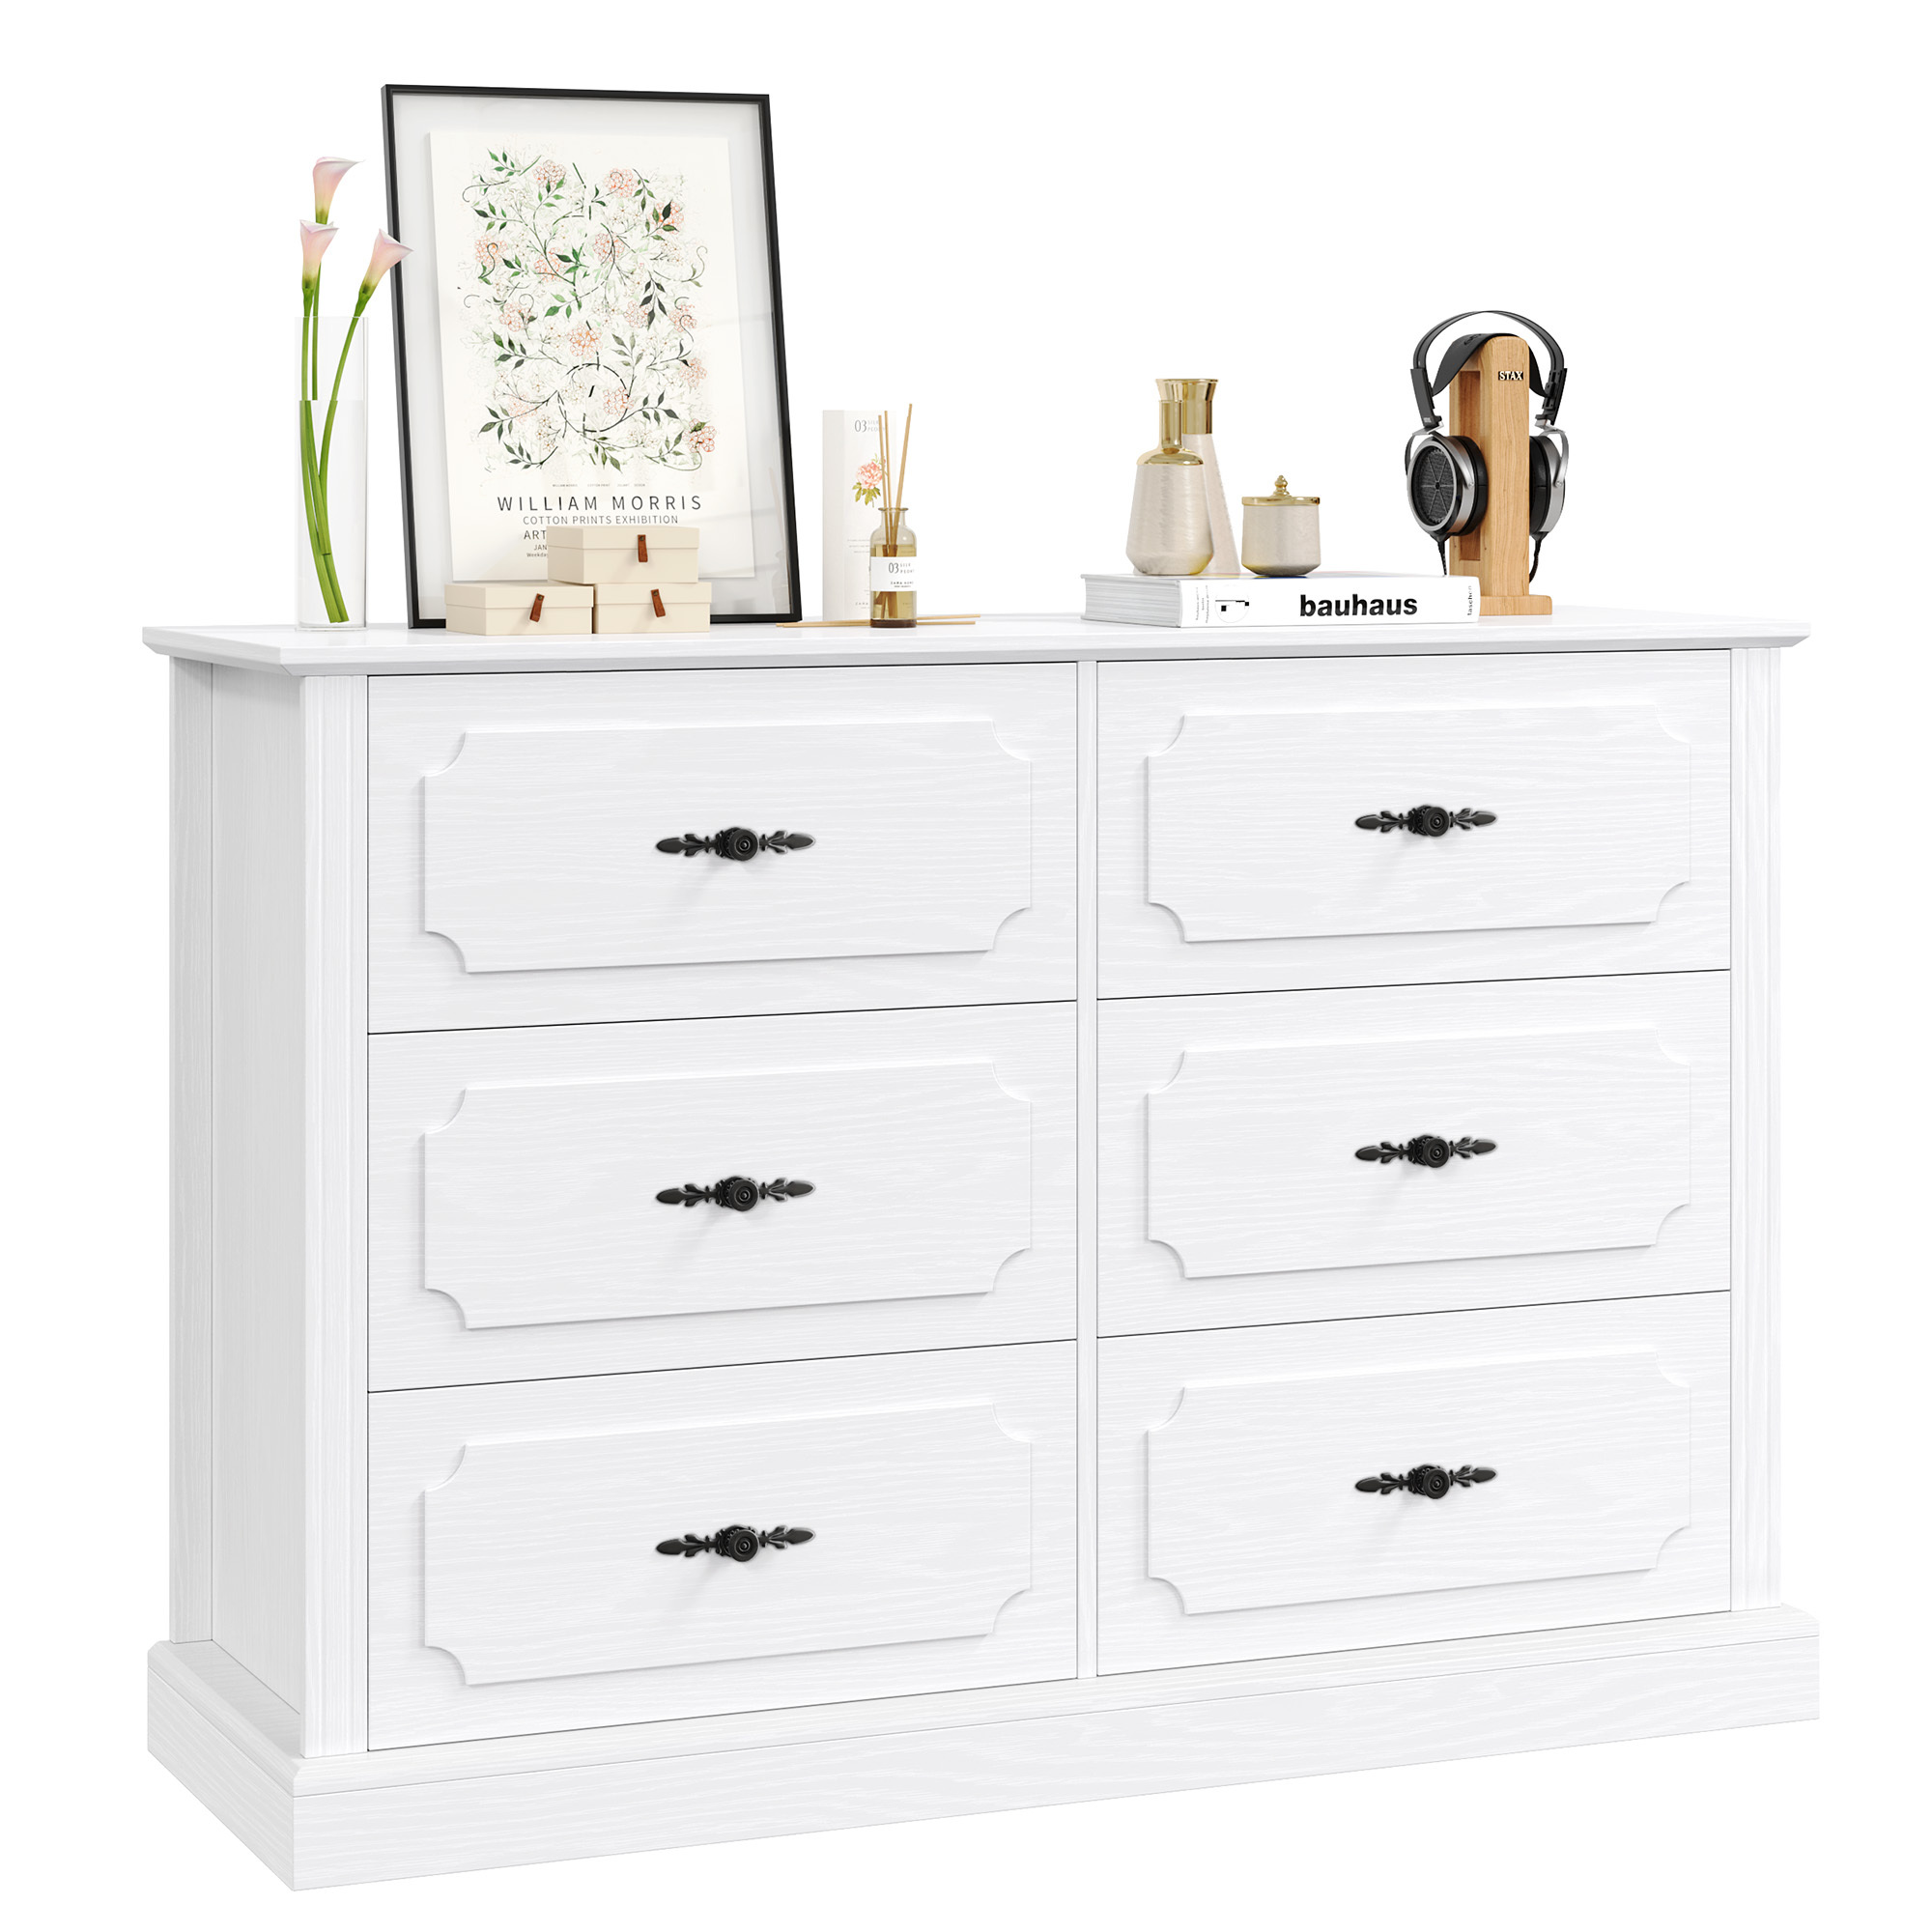 Homfa 6 Drawer White Double Dresser for Bedroom, Classic Wood Storage Cabinet for Living Room with Wide Top - image 3 of 7